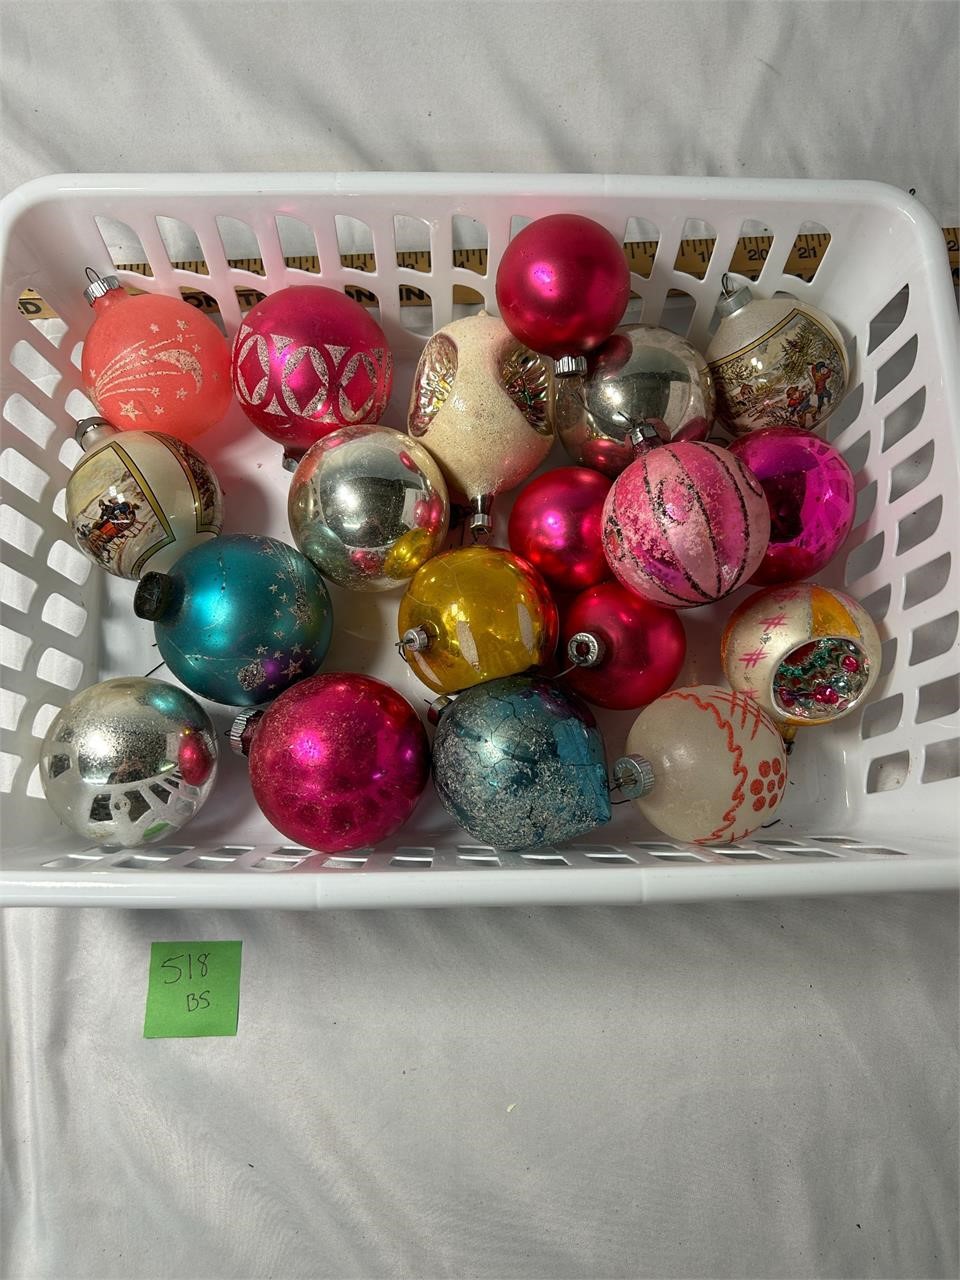 Assorted Vintage Glass Christmas Ornaments